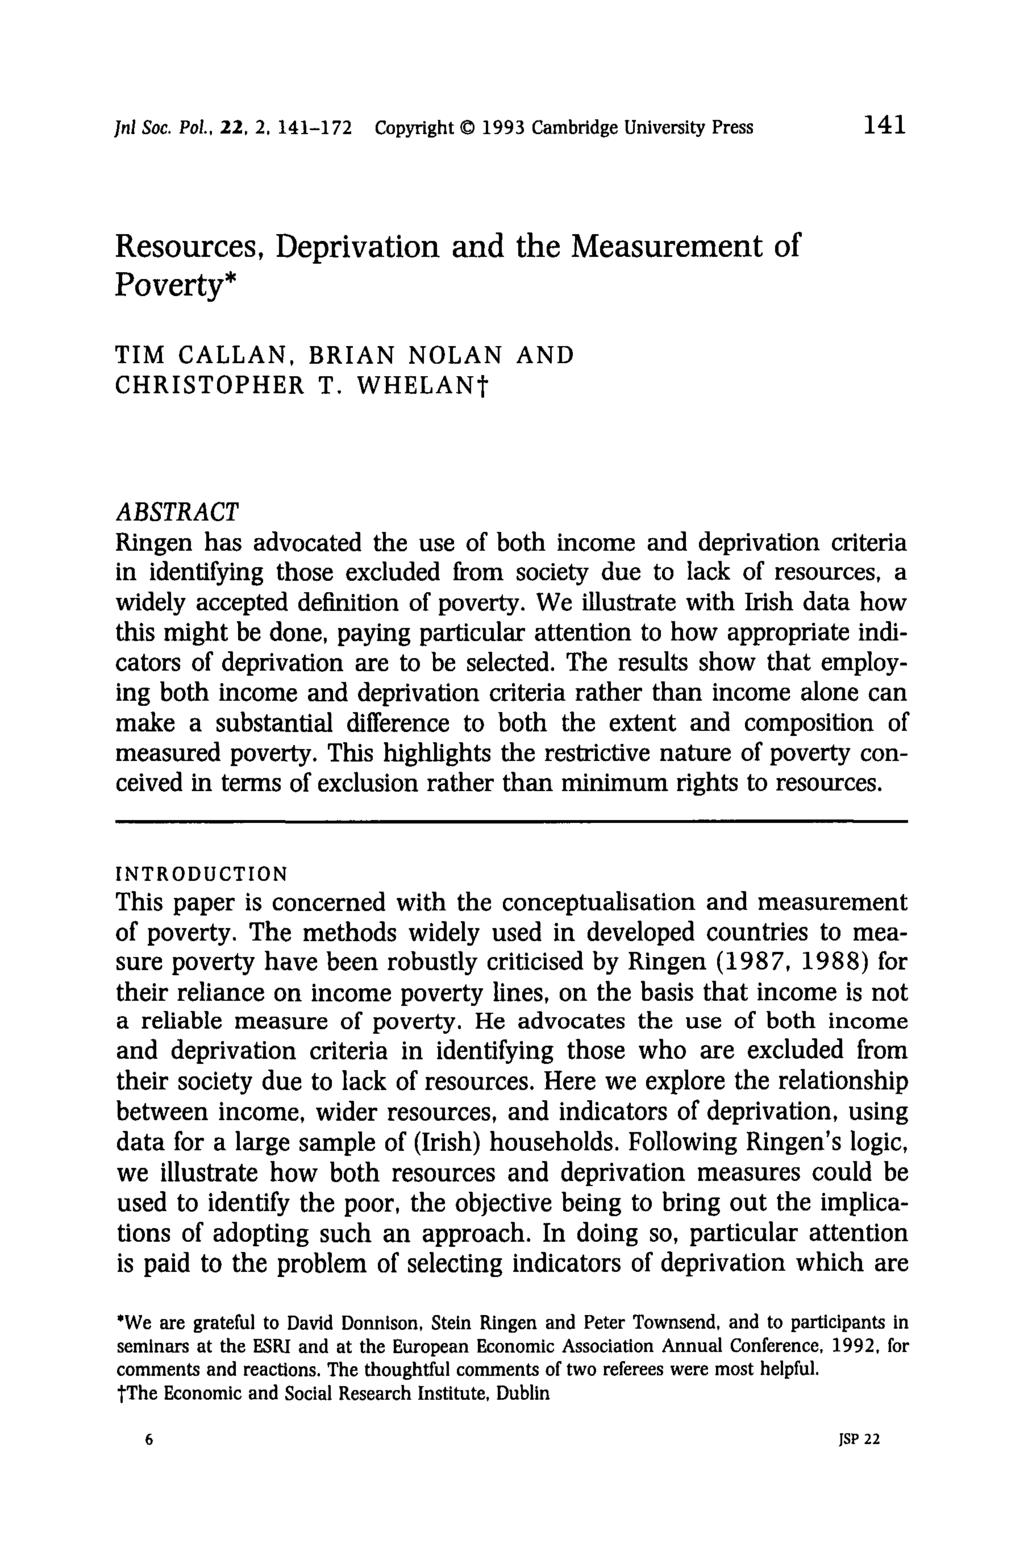 ]nl Soc. Pol., 22, 2, 141-172 Copyright 1993 Cambridge University Press 1 4 1 Resources, Deprivation and the Measurement of Poverty* TIM CALLAN, BRIAN NOLAN AND CHRISTOPHER T.